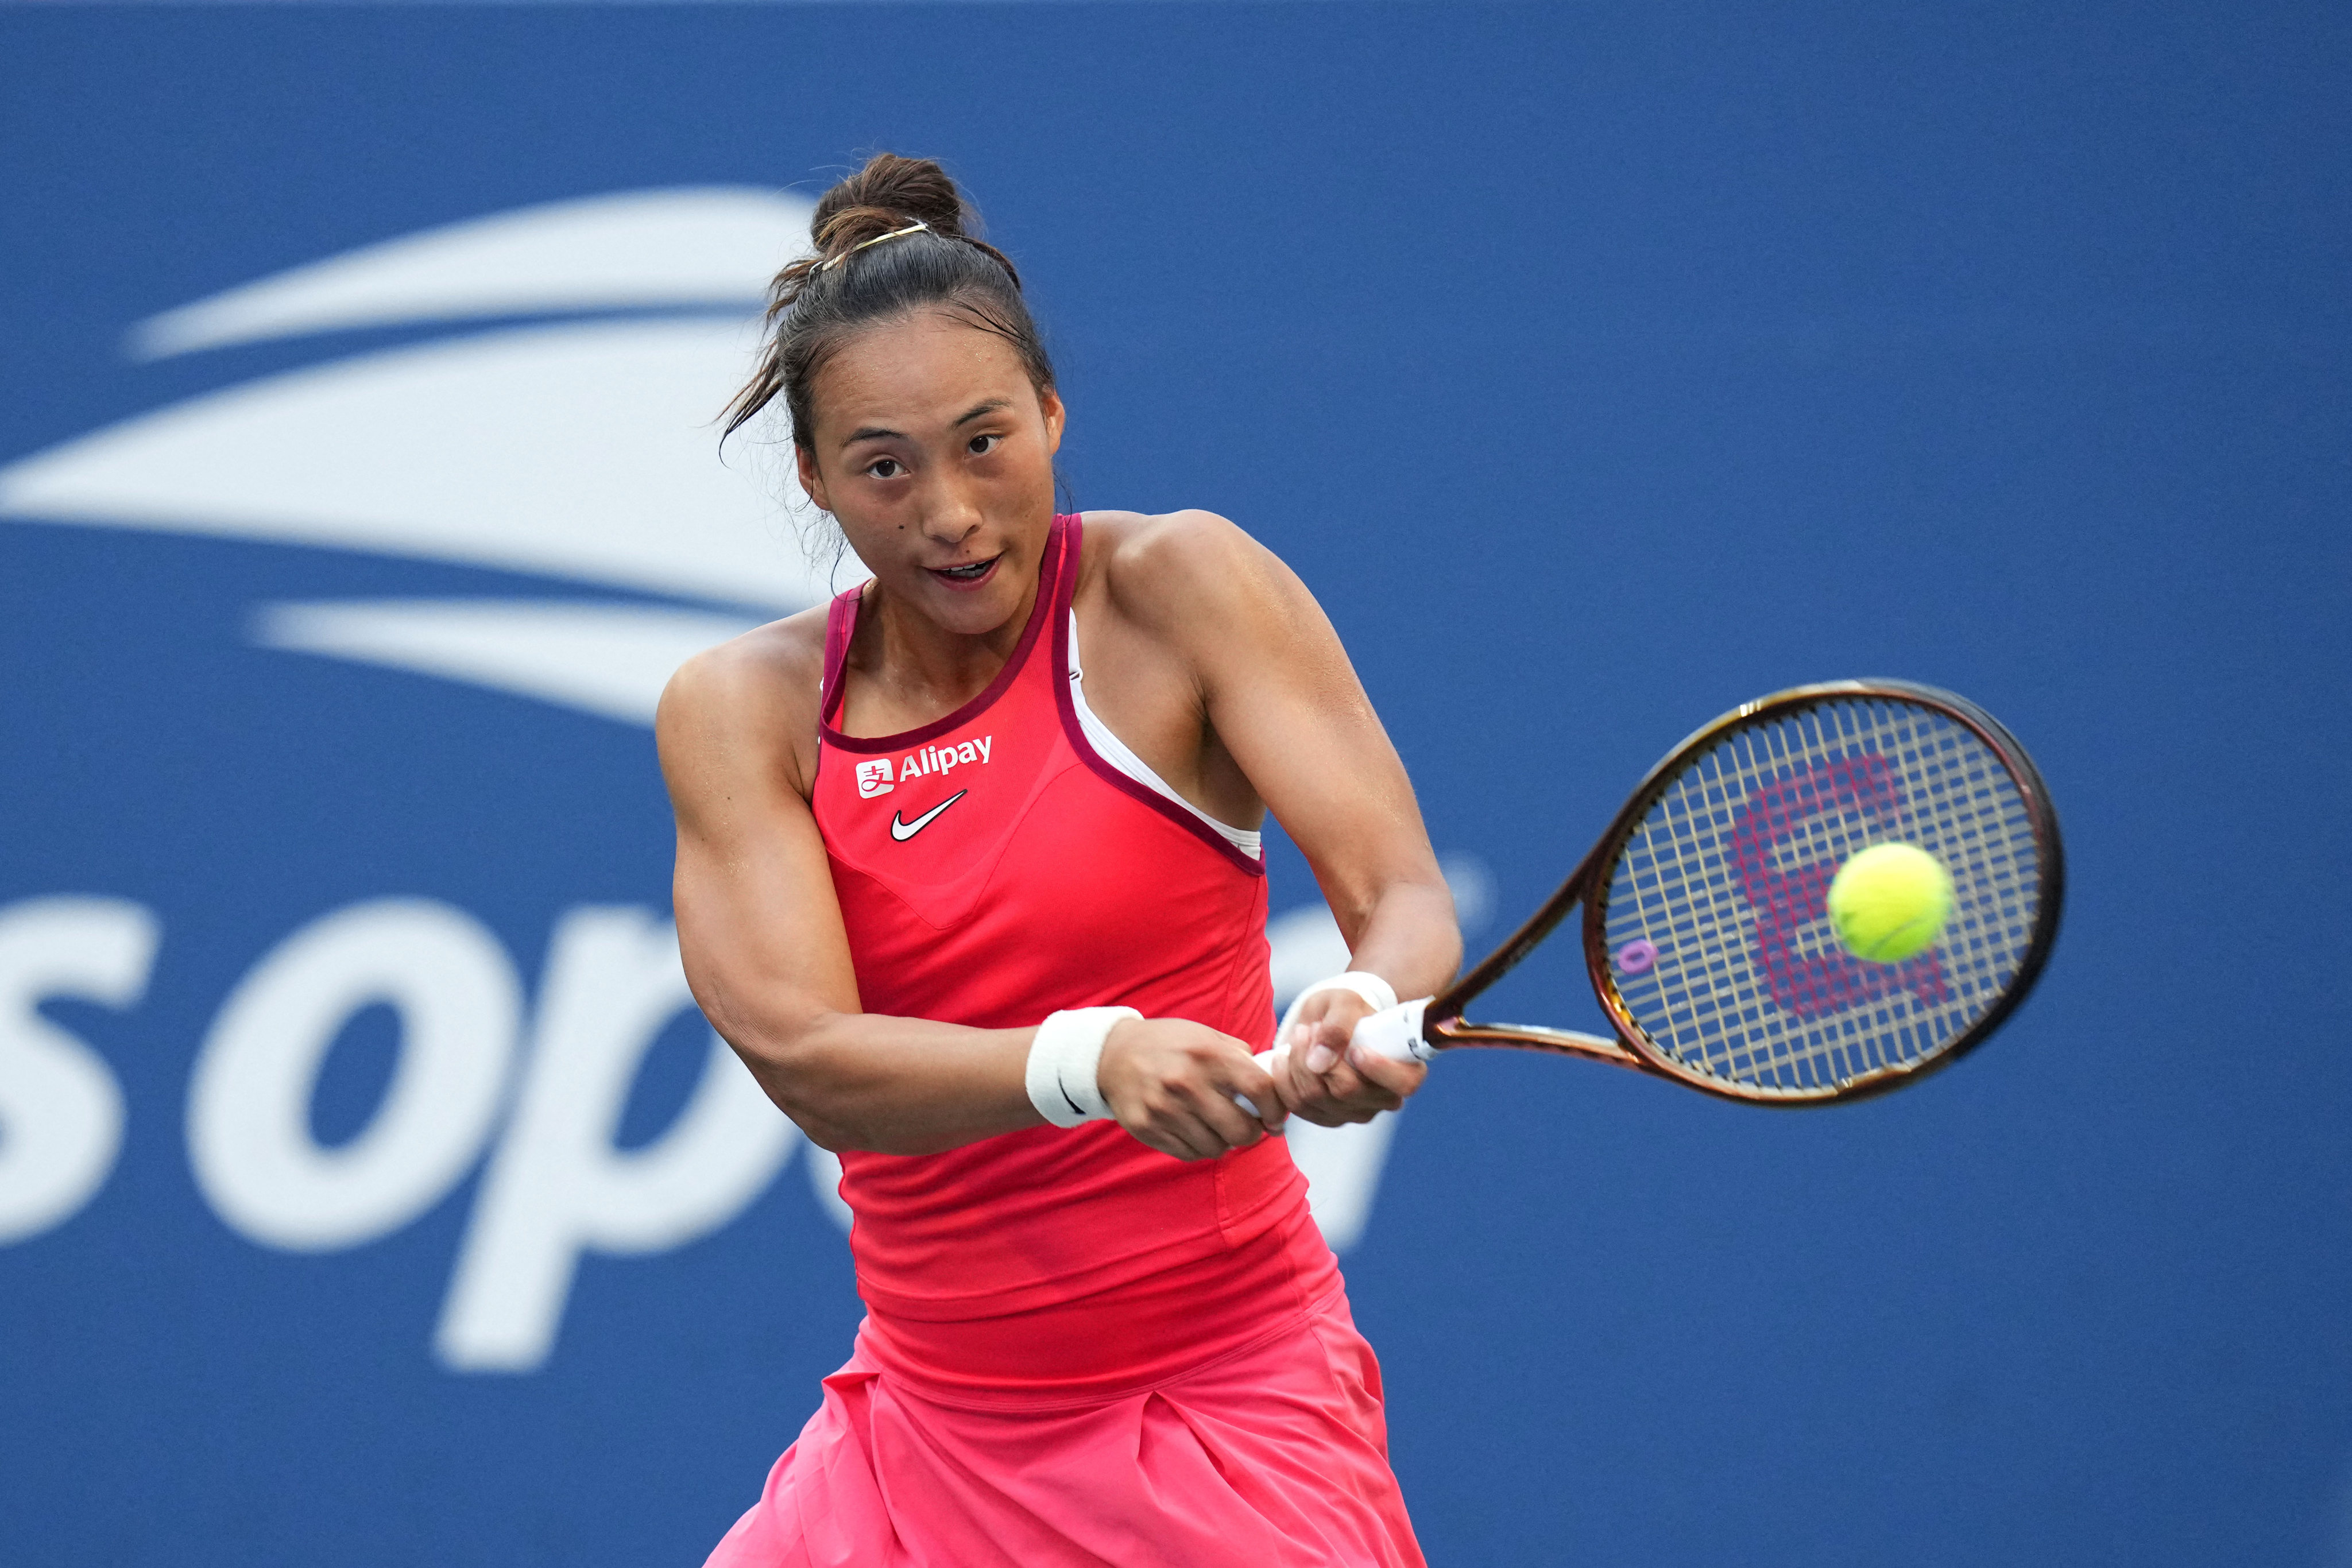 Zheng Qinwen returns the ball to Ons Jabeur at the US Open. Photo: USA TODAY Sports